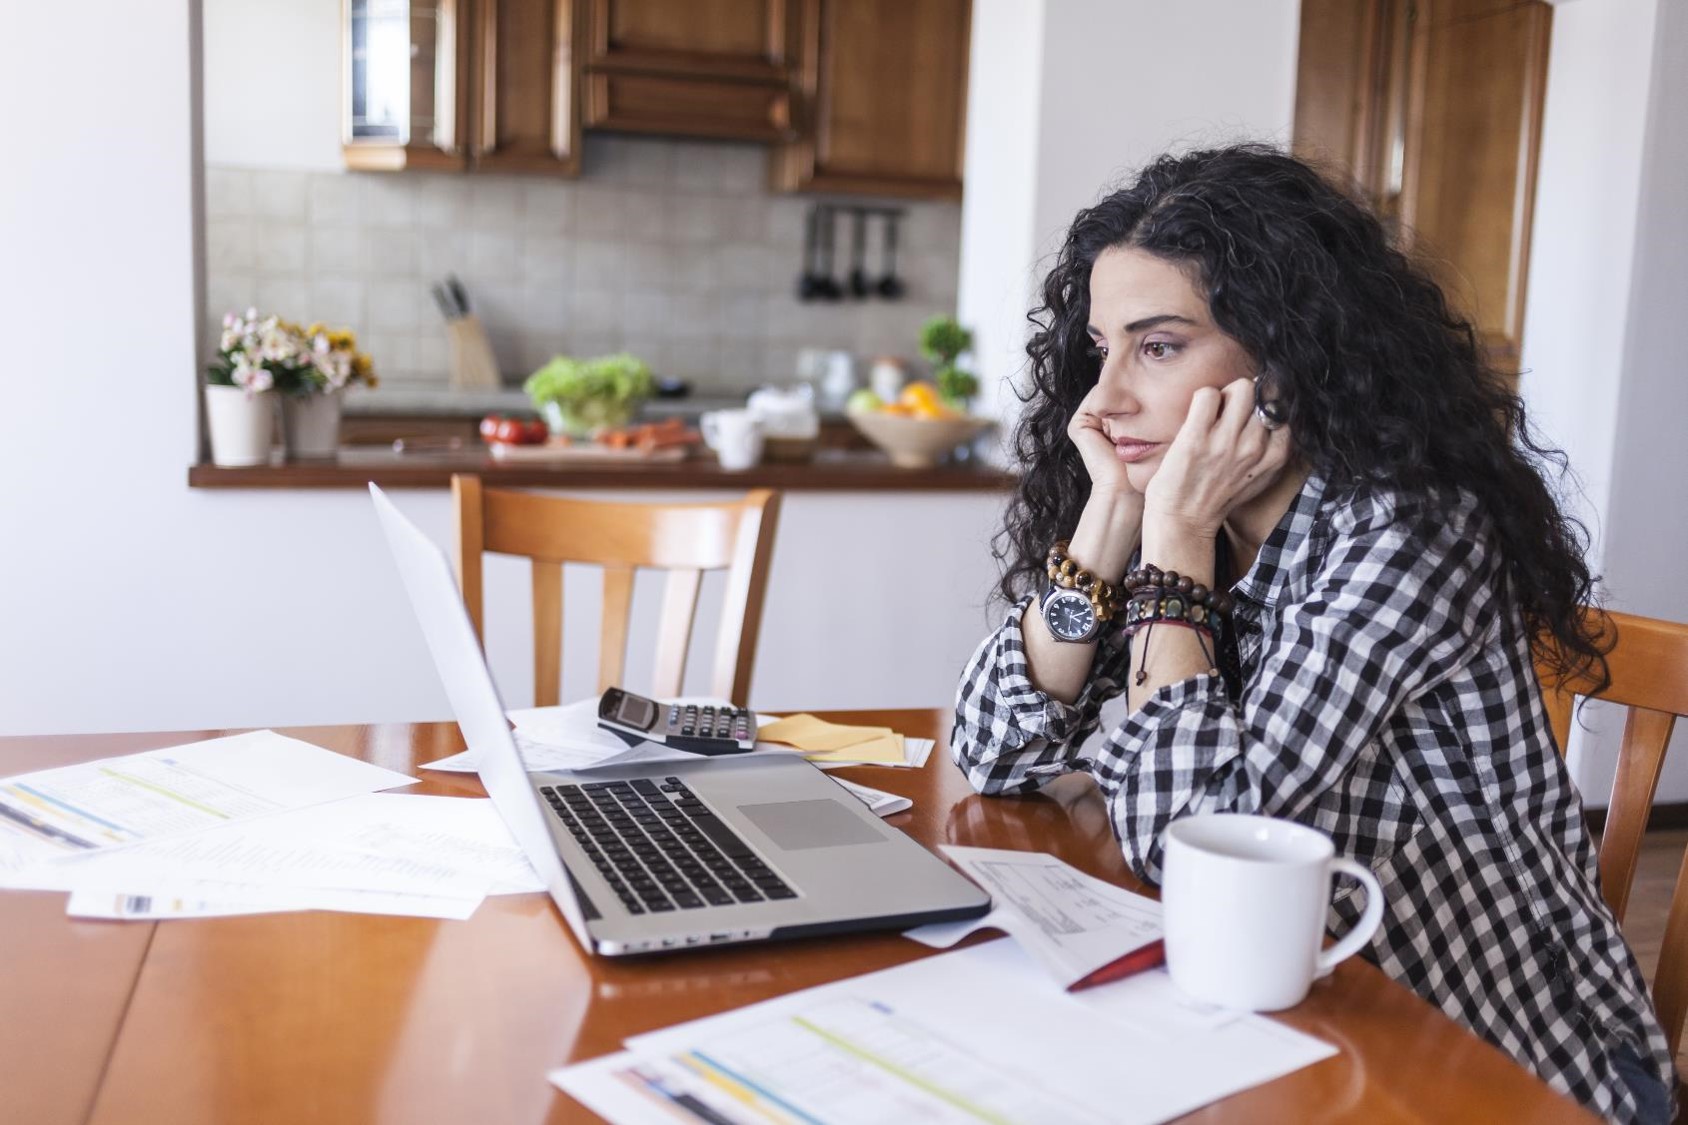 Woman looks at laptop and bills on the table.